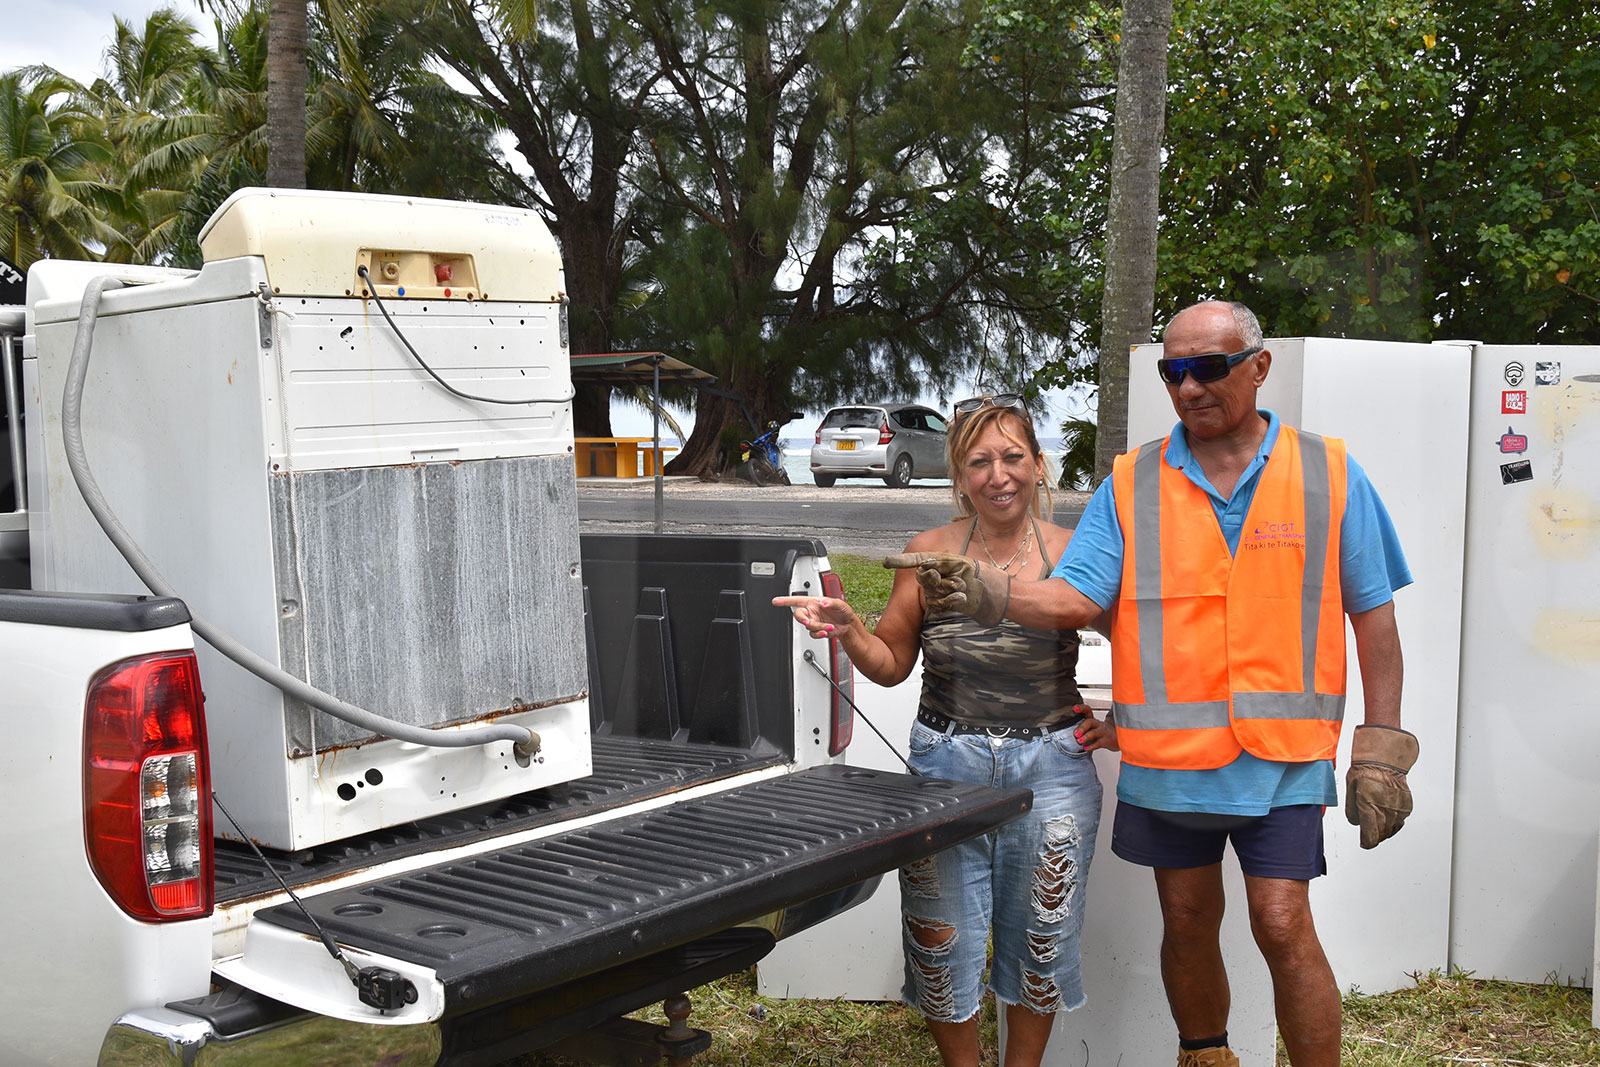 Rarotonga to ship 90,000kg of legacy waste to NZ in record cleanup